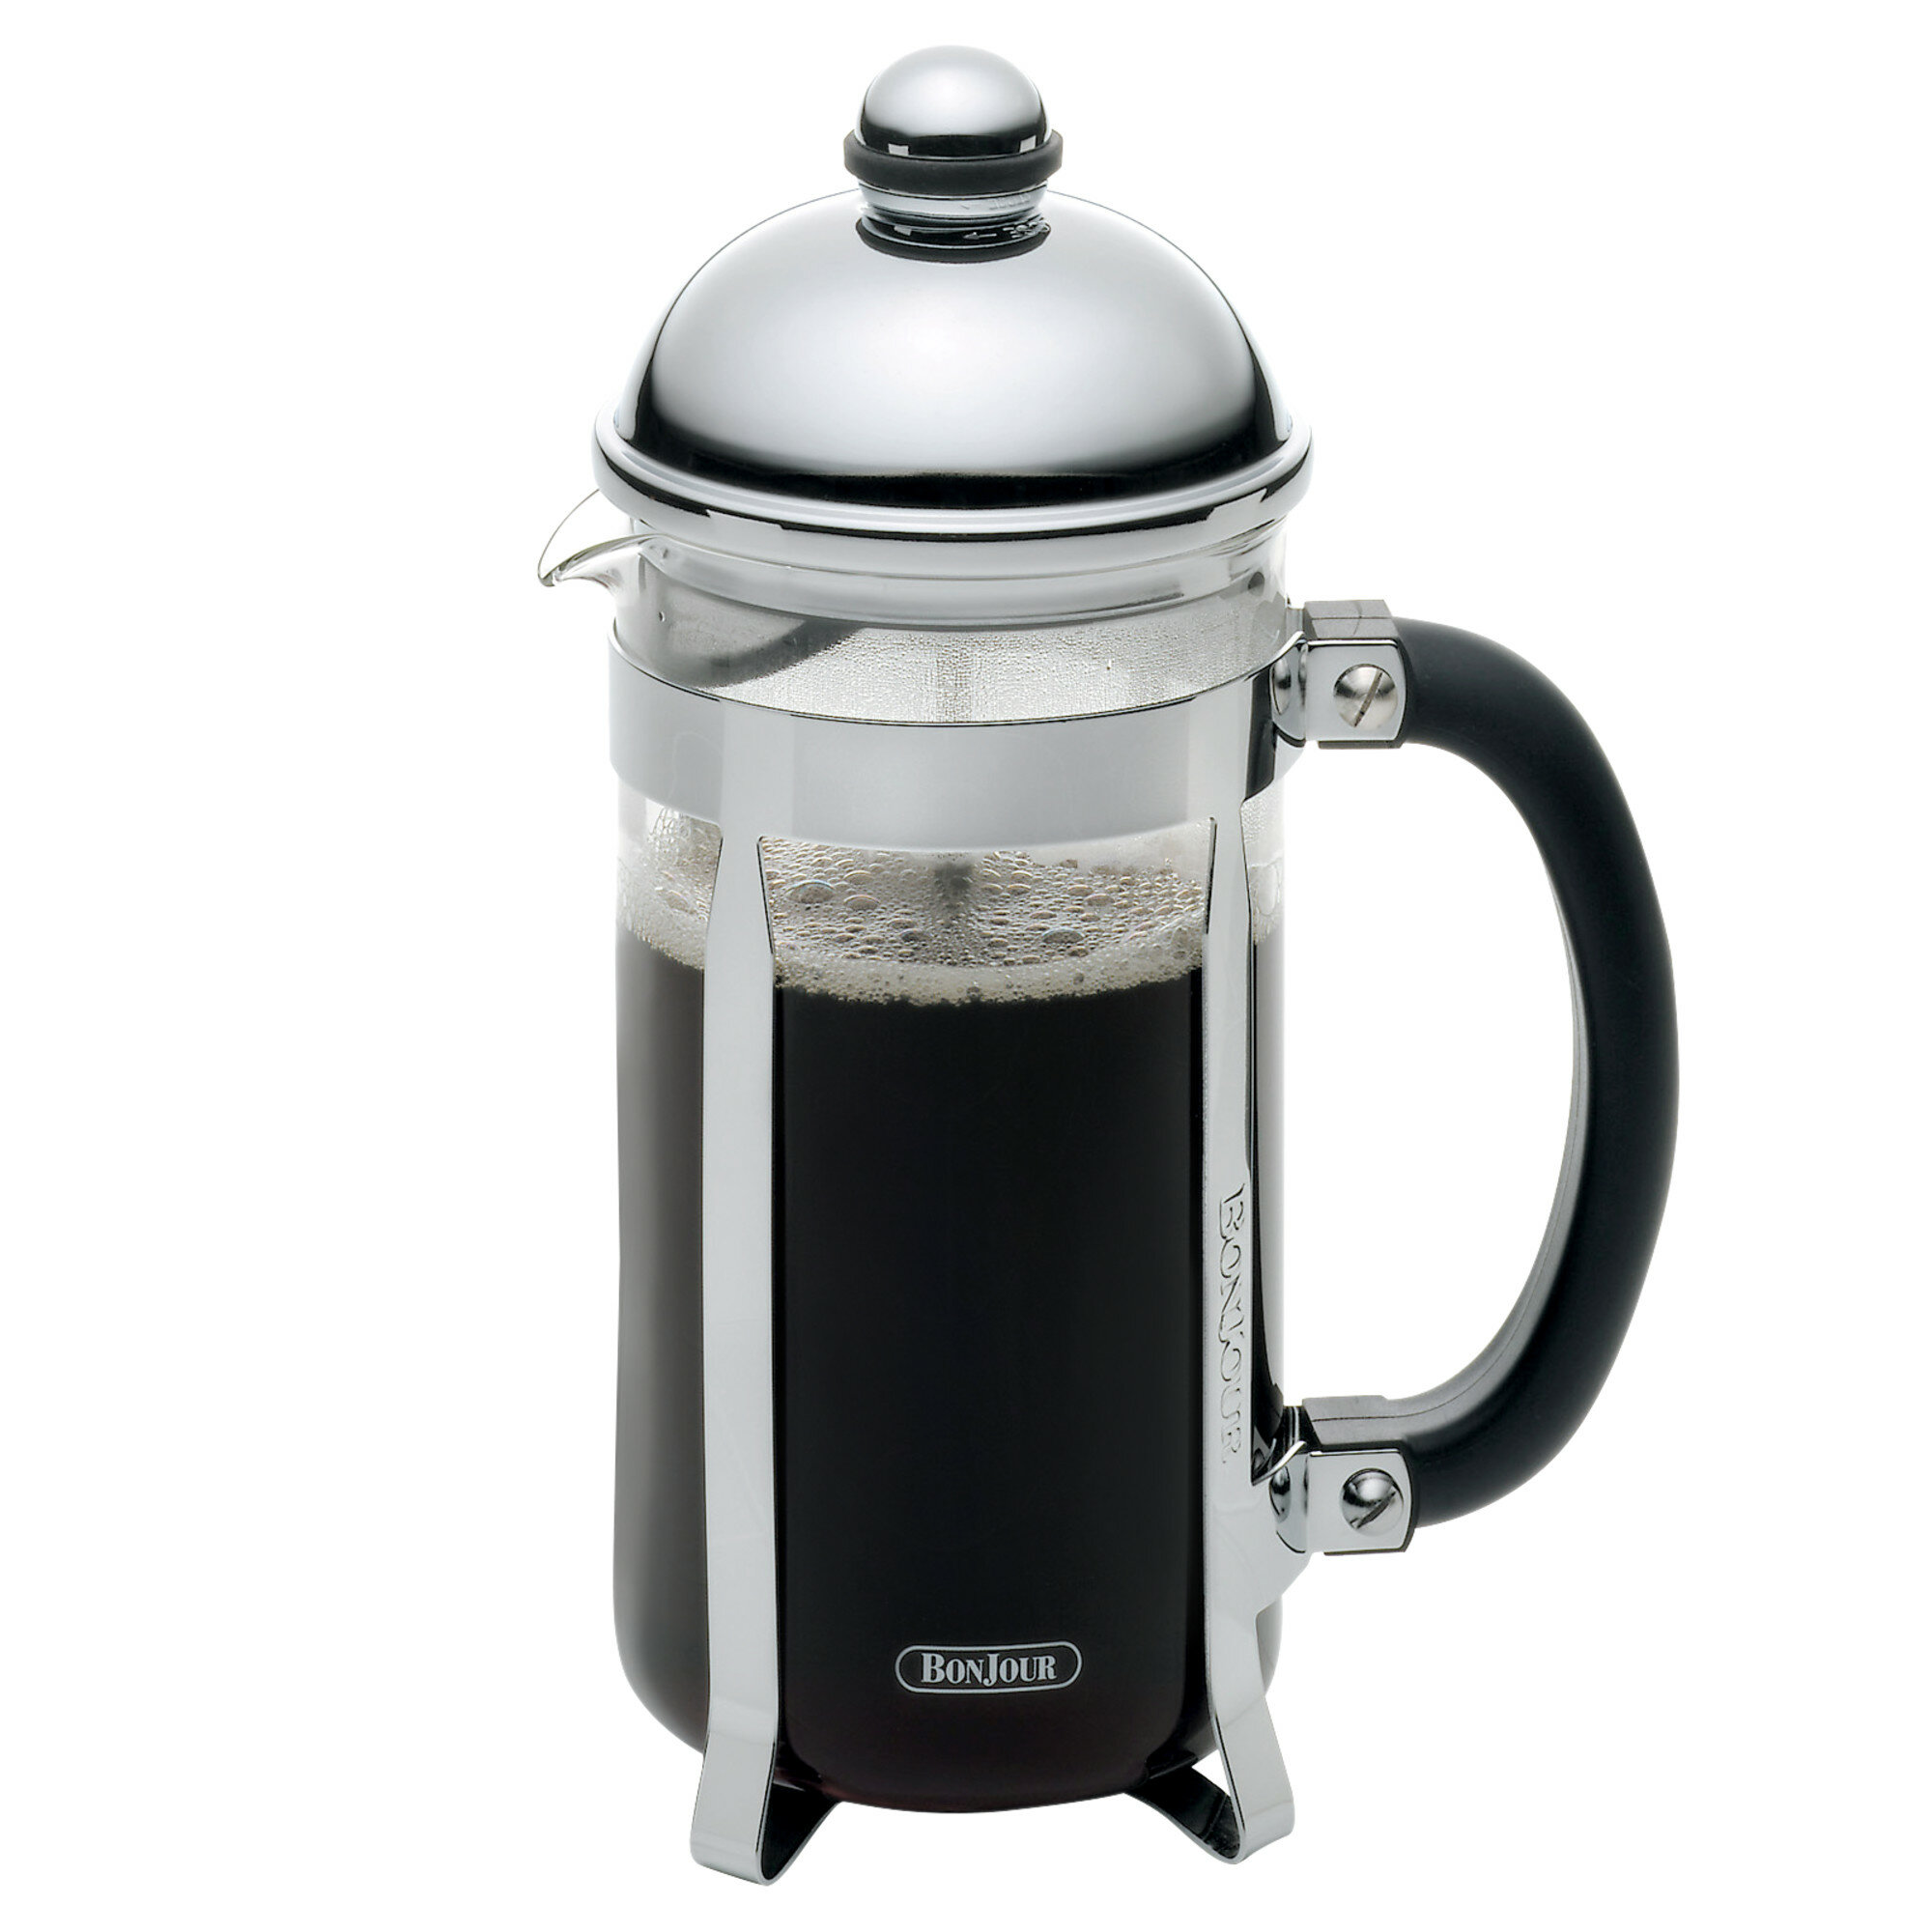 French Press: GROSCHE Boston, available in 2 sizes, 3 cup and 8 cup